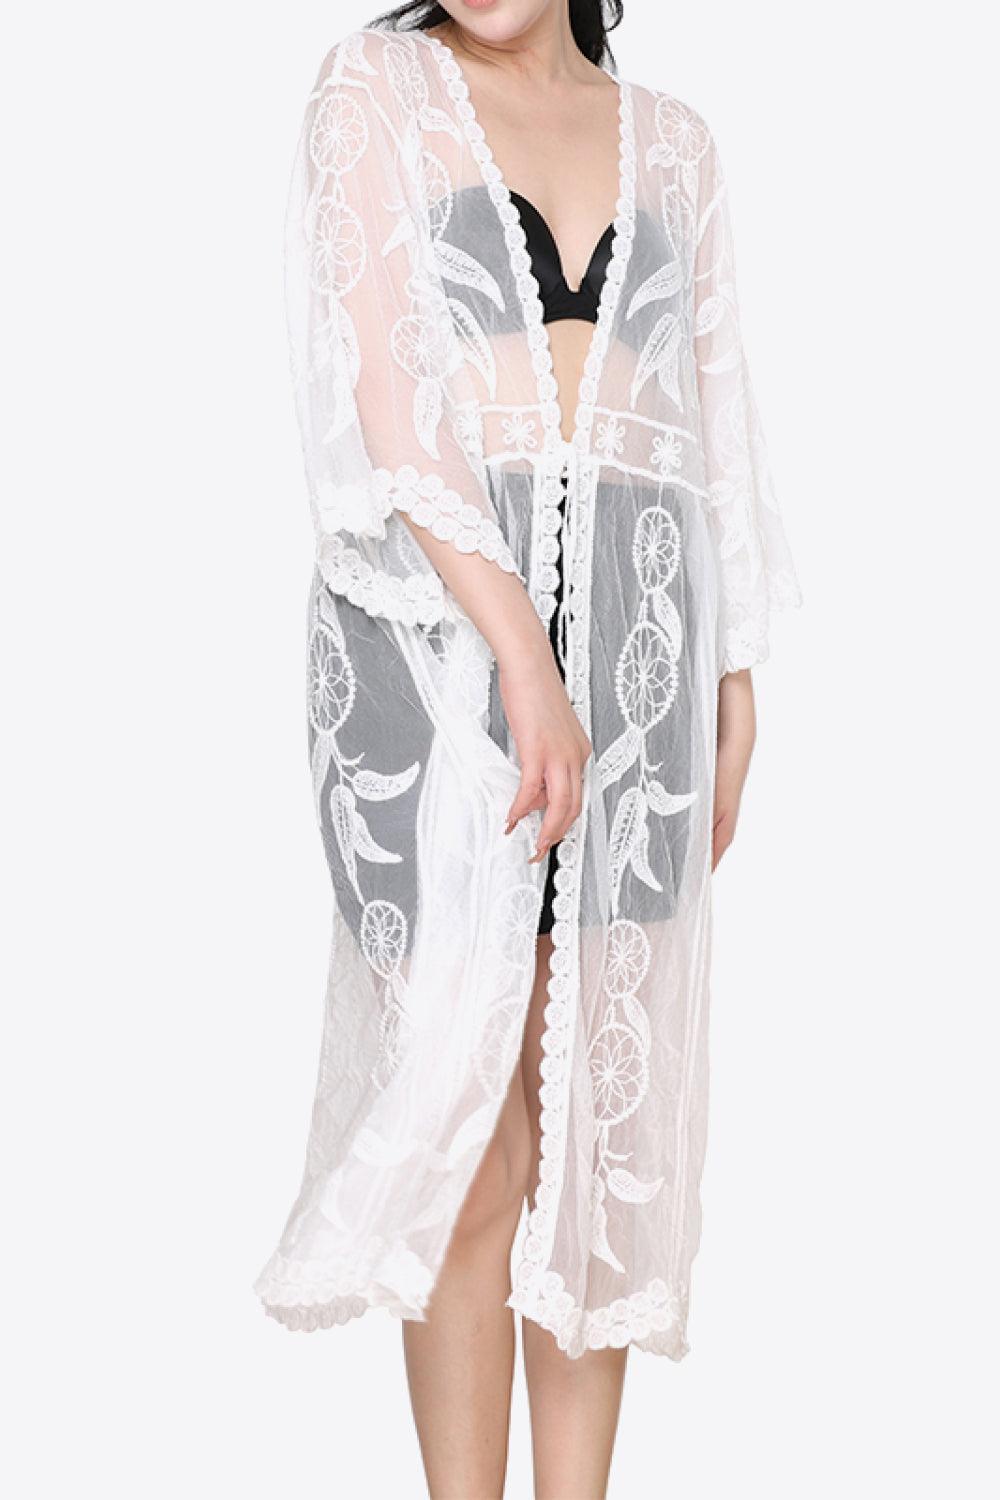 Tied Sheer Cover Up Cardigan - Immenzive